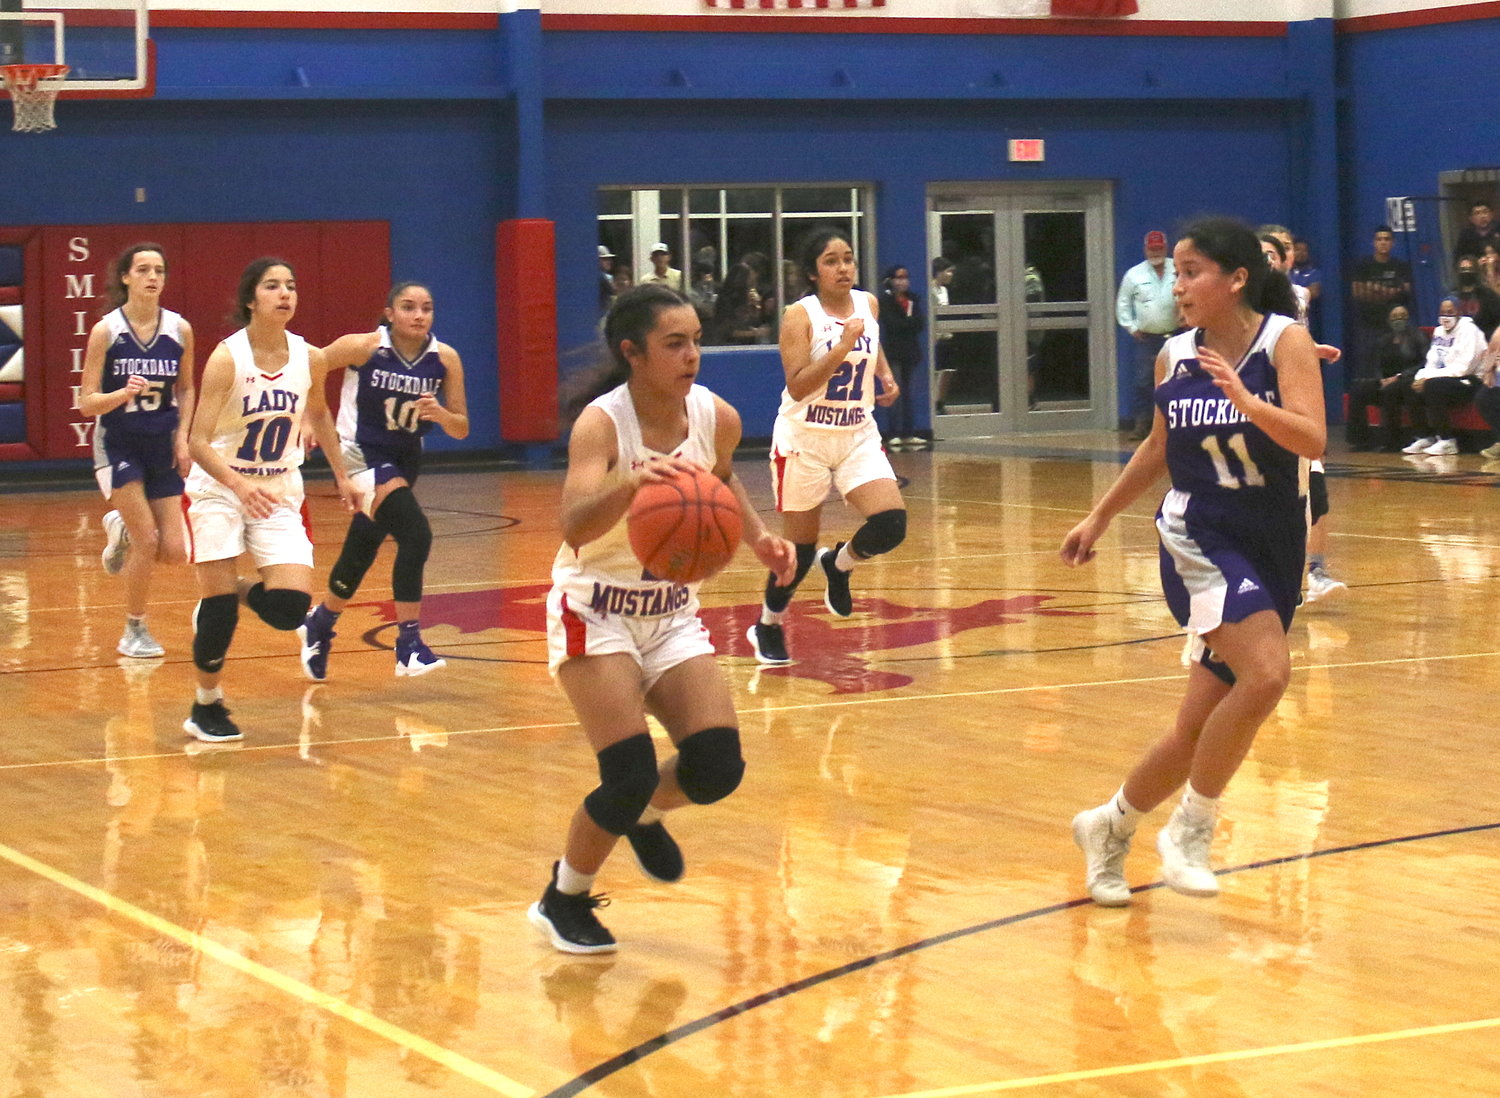 Mady Velasquez brings the ball down court on a fast break, followed by Ariel Villanueva and Deanna Amaya against Stockdale. Velasquez scored three points against Cole.